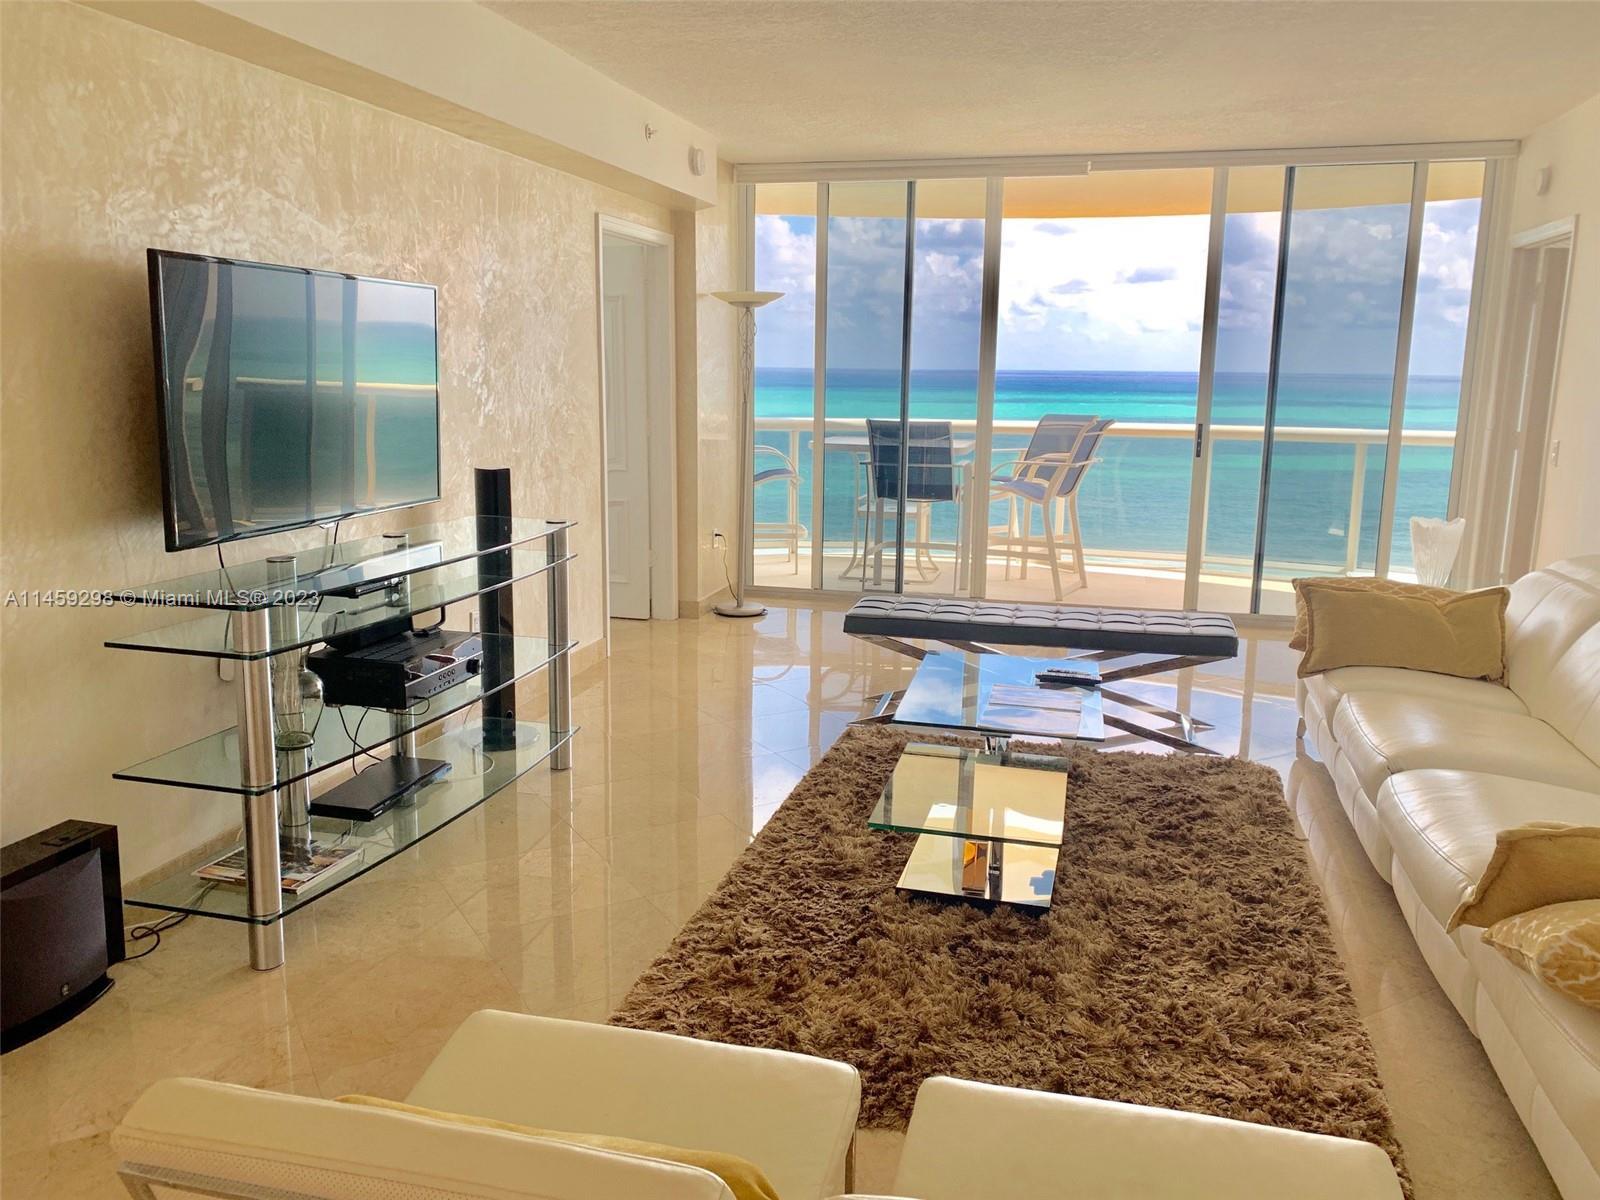 AMAZING 3 BEDROOMS AND 3 BATHROOMS UNIT AT ONE OF THE MOST EXCLUSIVE BUILDINGS IN SUNNY ISLES BEACH.